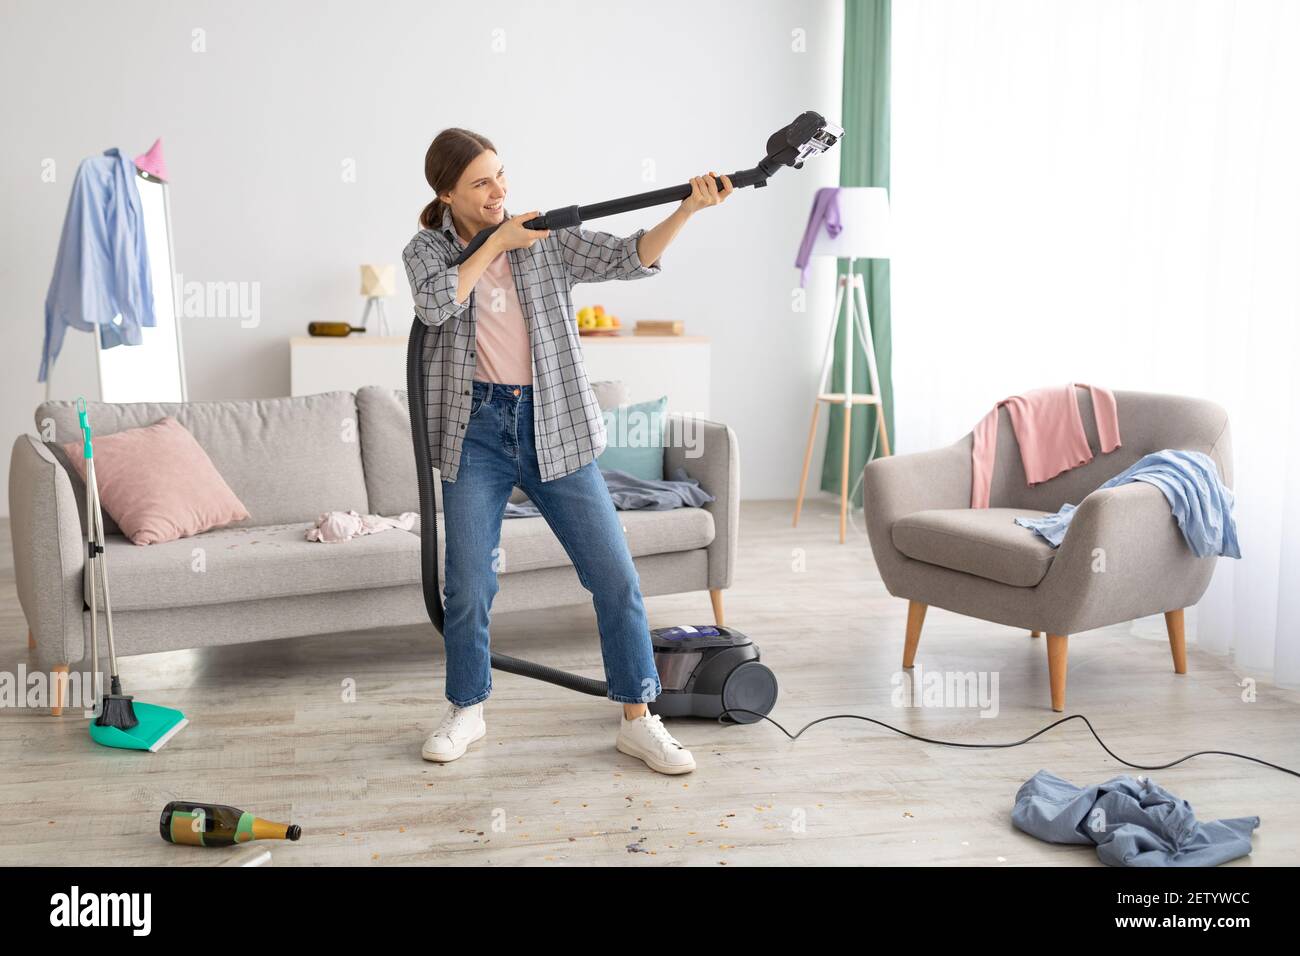 Positive young lady holding vacuum cleaner like rifle, ready to perform cleanup at messy room after party, copy space Stock Photo